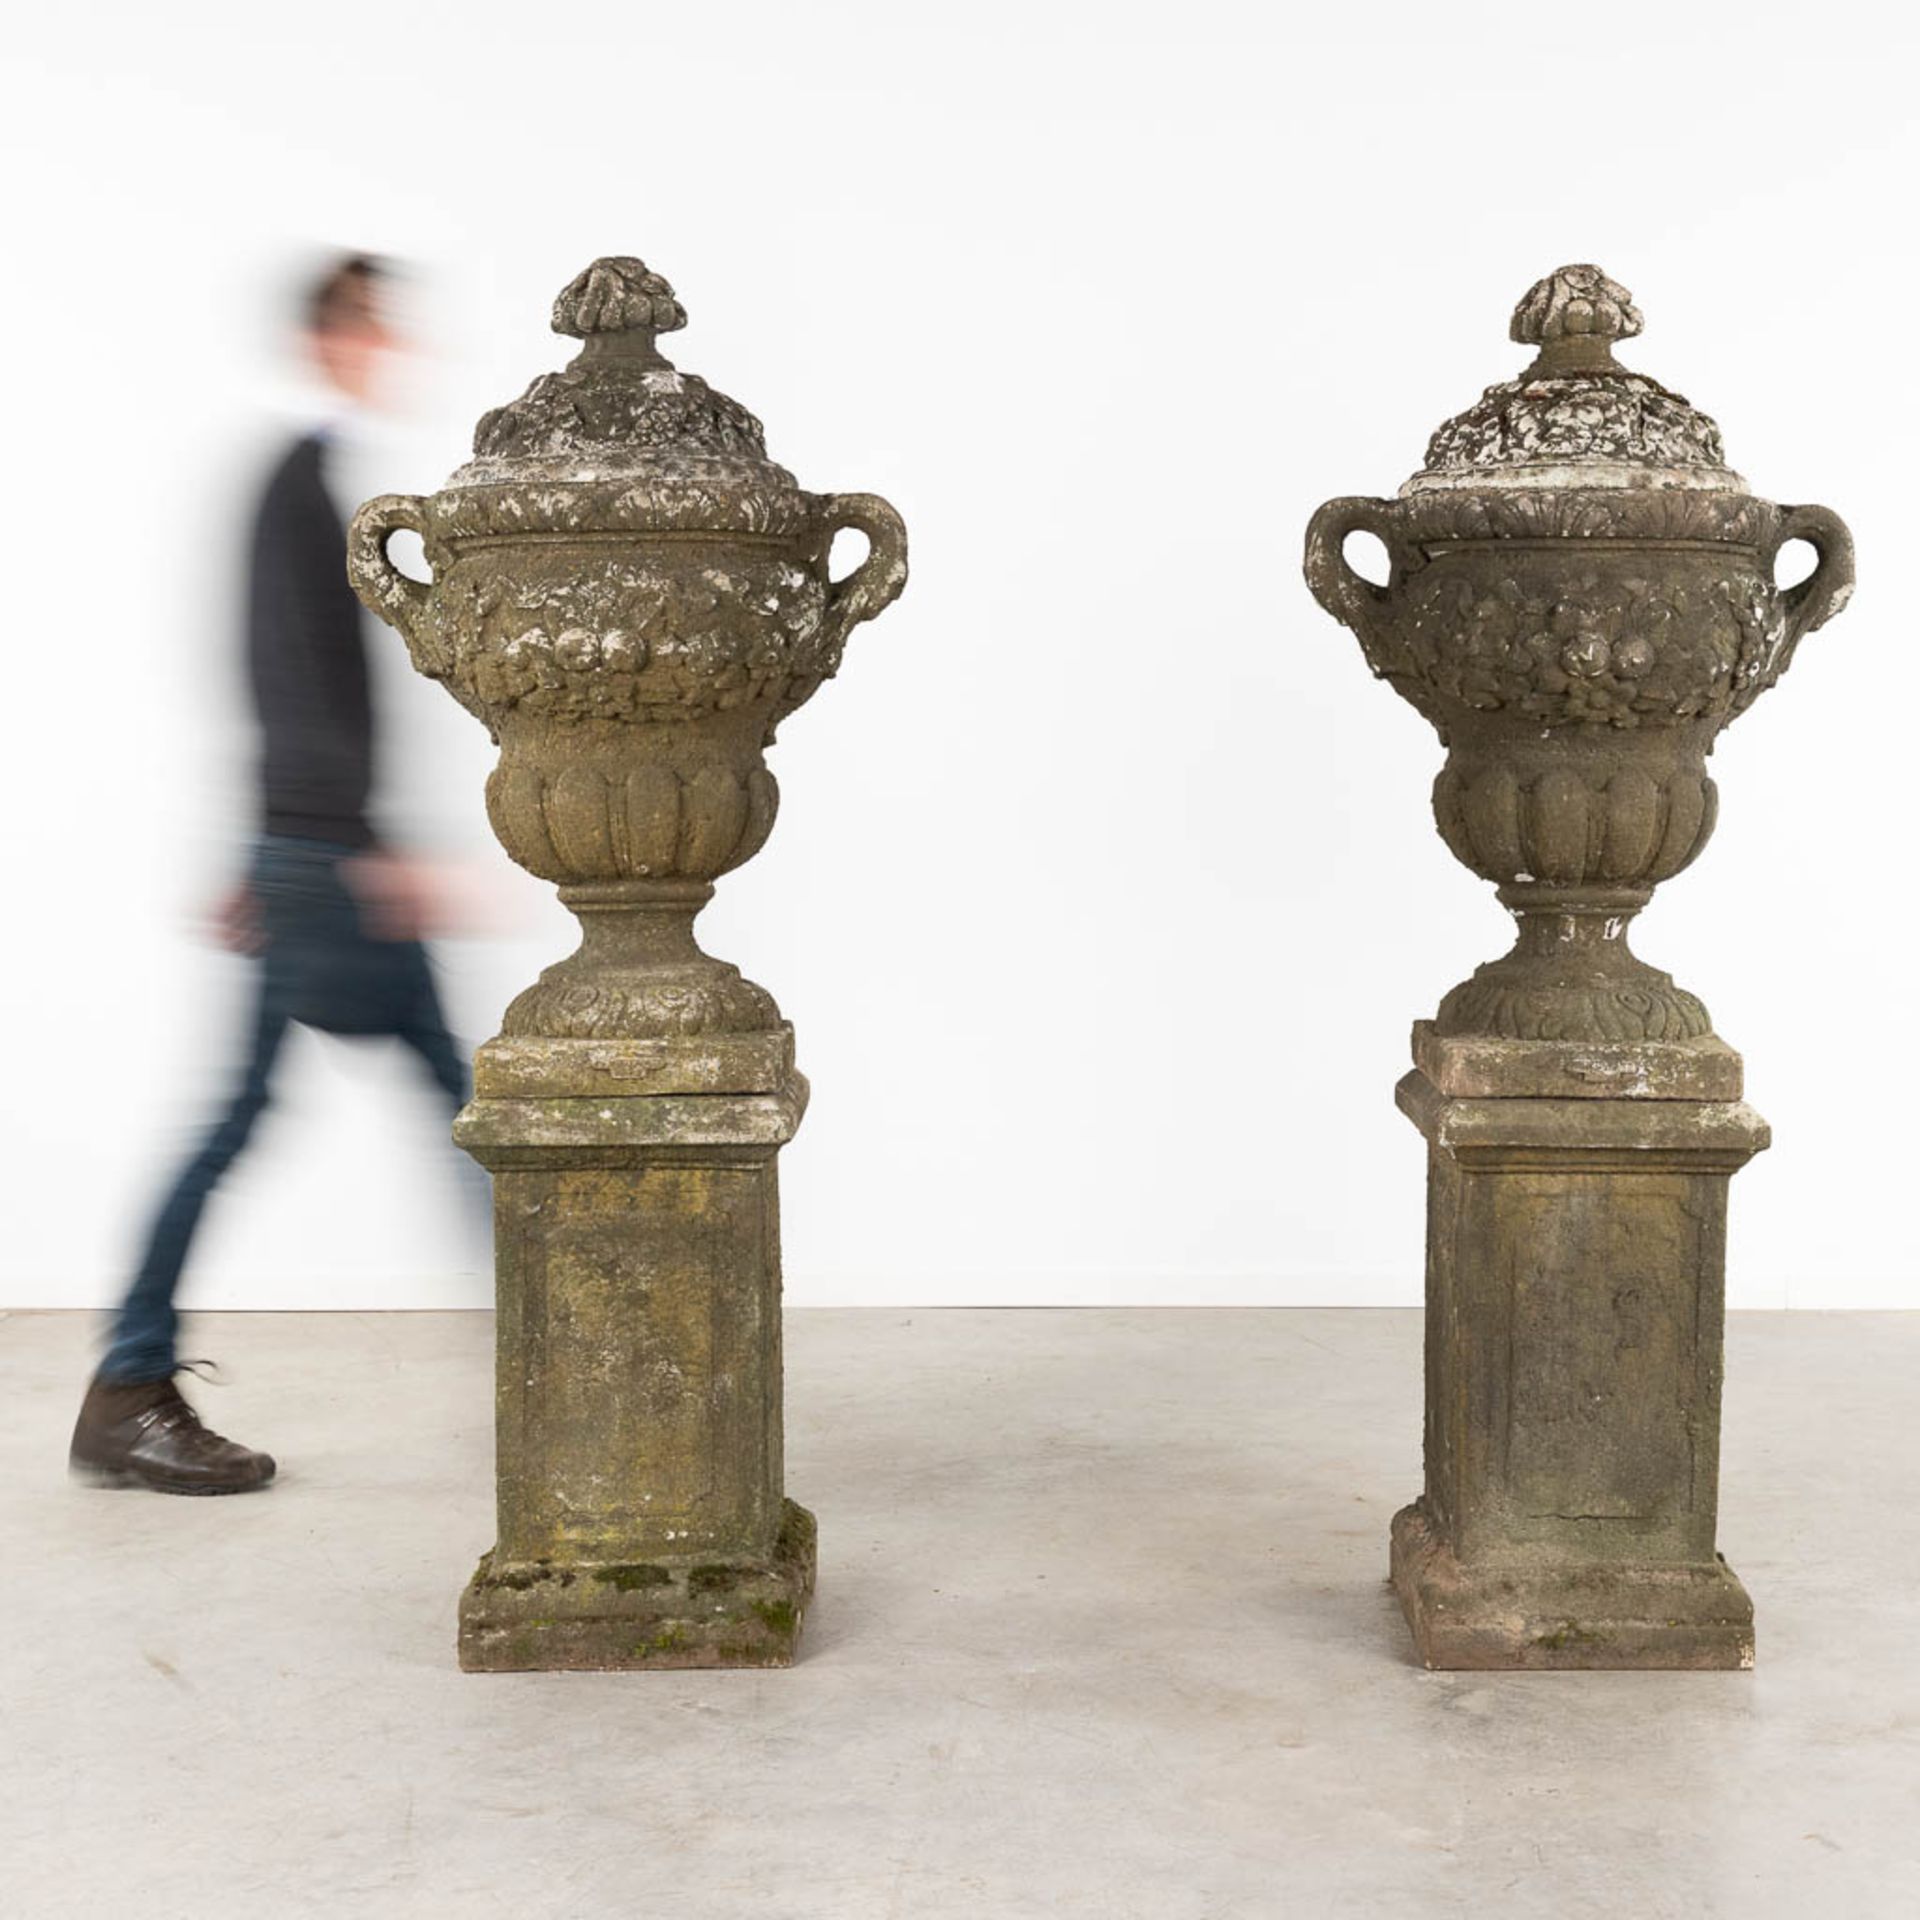 A pair of large urns with a lid, standing on a pedestal, concrete, 20th C. (D:50 x W:67 x H:173 cm) - Image 3 of 8